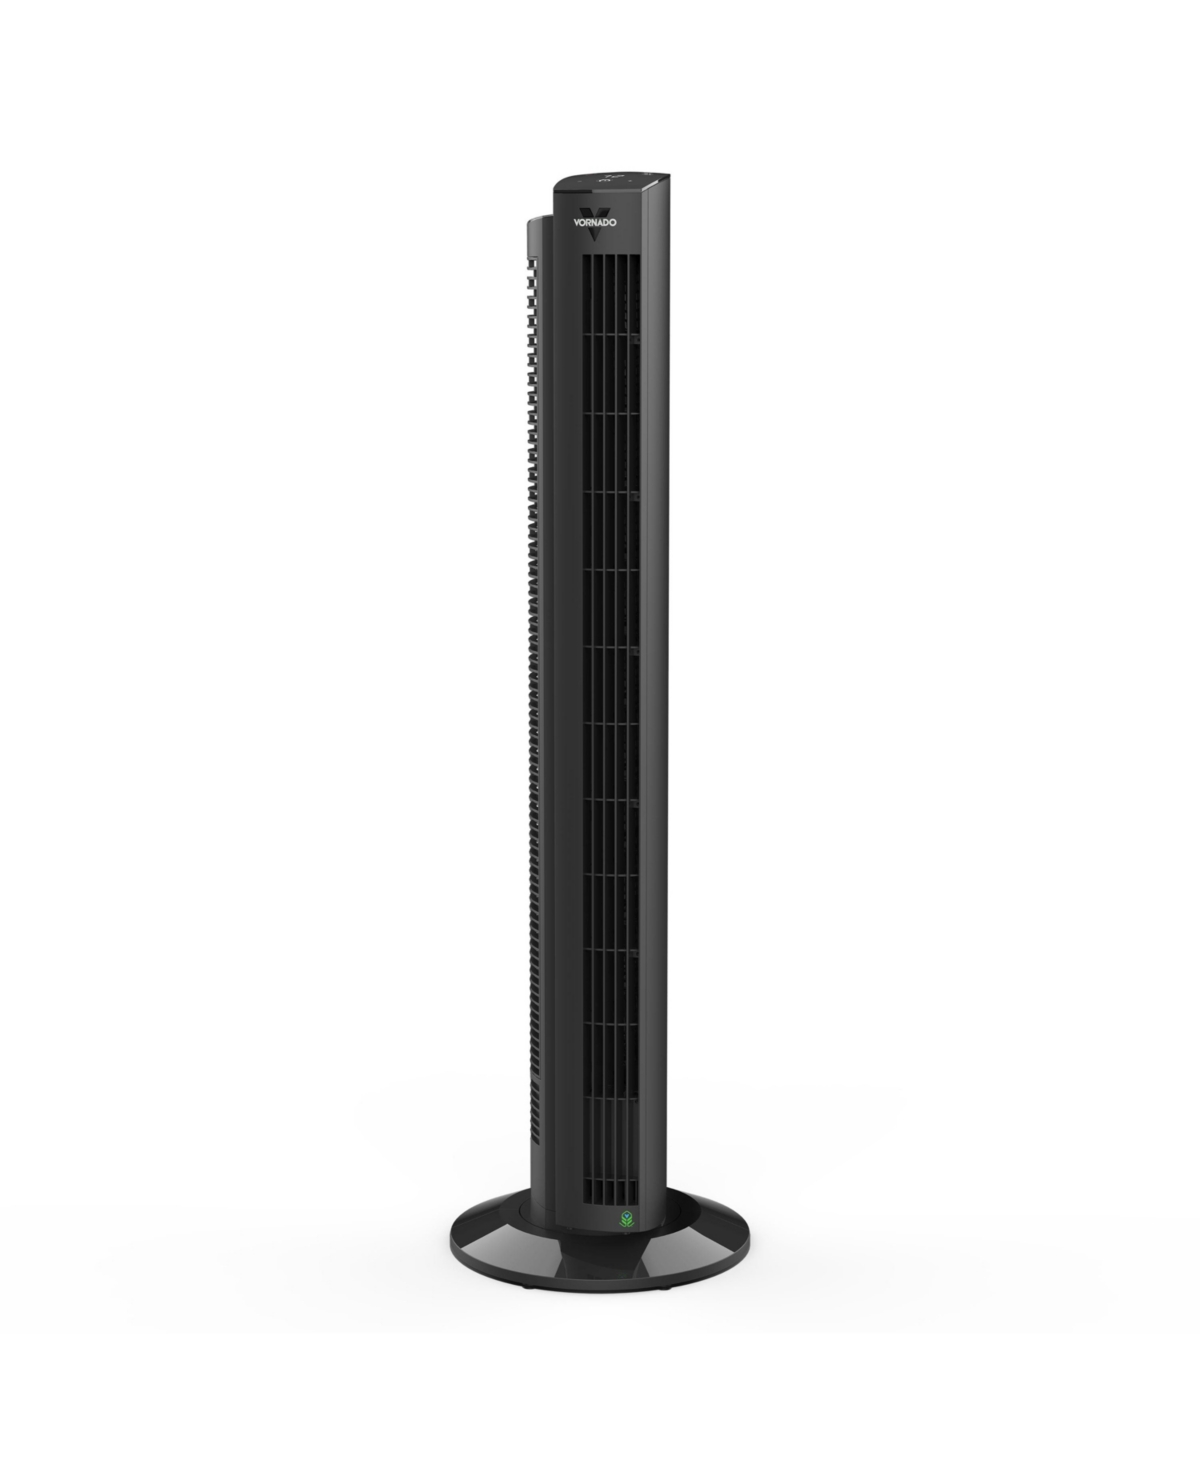 Vornado Ozi42dc Tower Fan With Remote And Timer, Oscillating Standing Fan For Bedroom, Variable Speed For Pr In Black